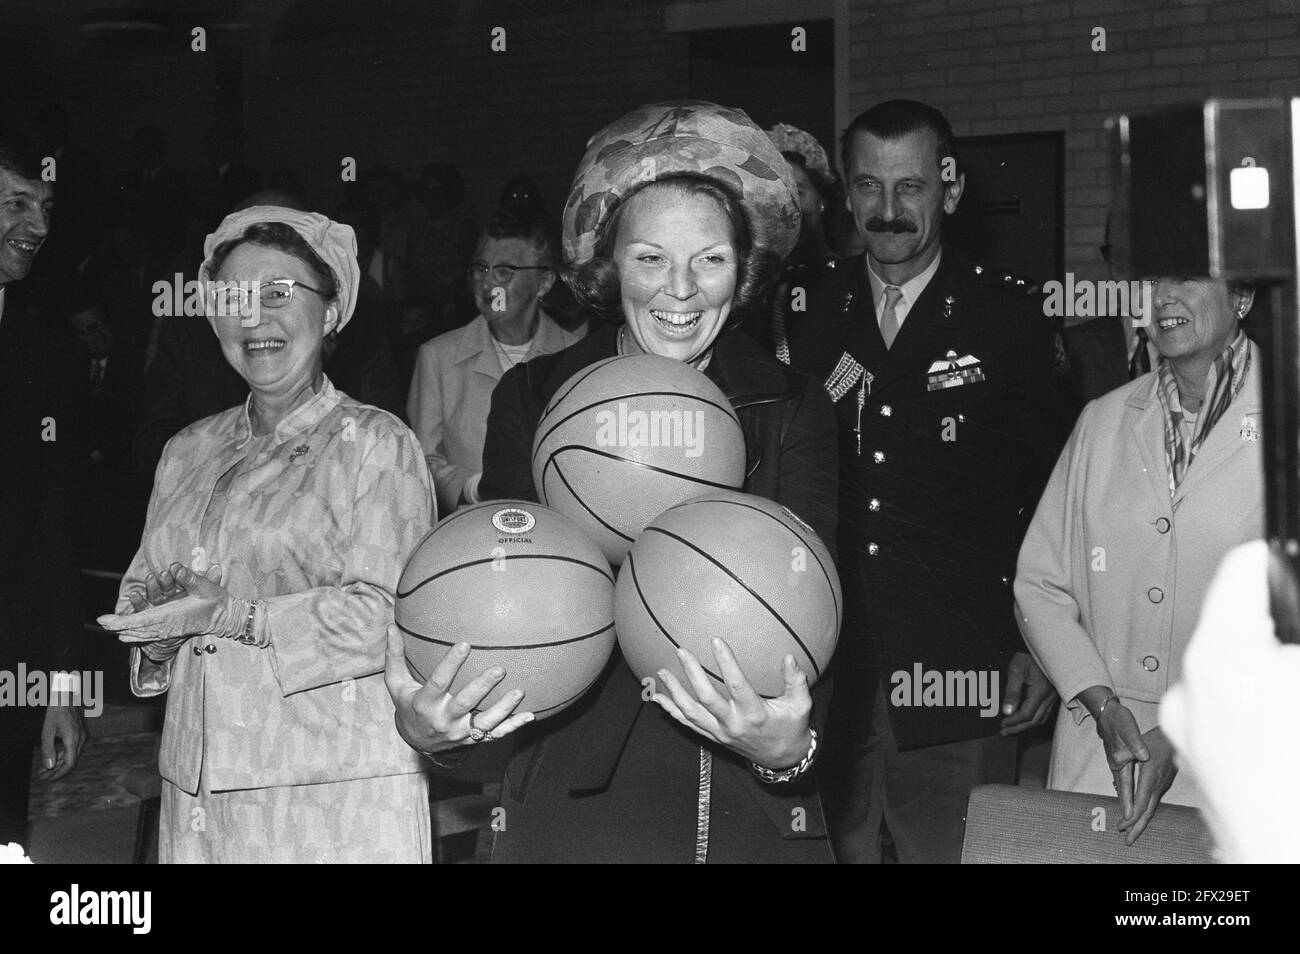 Princess Beatrix opens sports hall Strijland in Nijkerk, Beatrix with three balls for her children, September 26, 1972, openings, princesses, sports halls, The Netherlands, 20th century press agency photo, news to remember, documentary, historic photography 1945-1990, visual stories, human history of the Twentieth Century, capturing moments in time Stock Photo